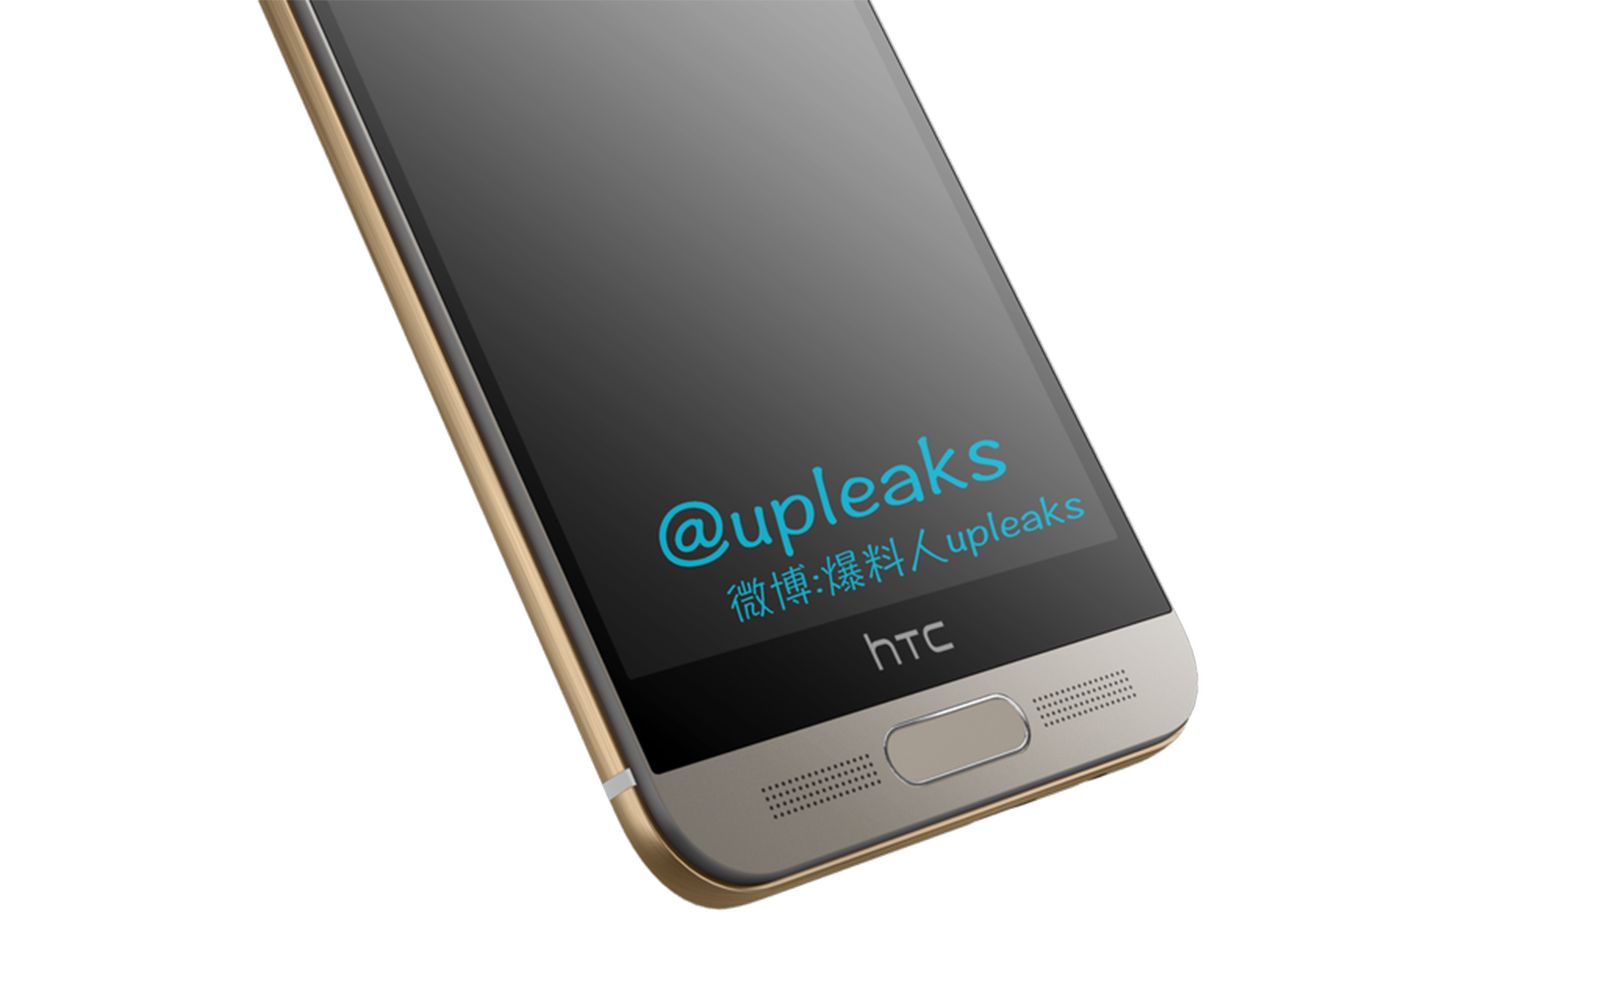 htc one m9 photos leak showing fingerprint reader and duo camera image 1